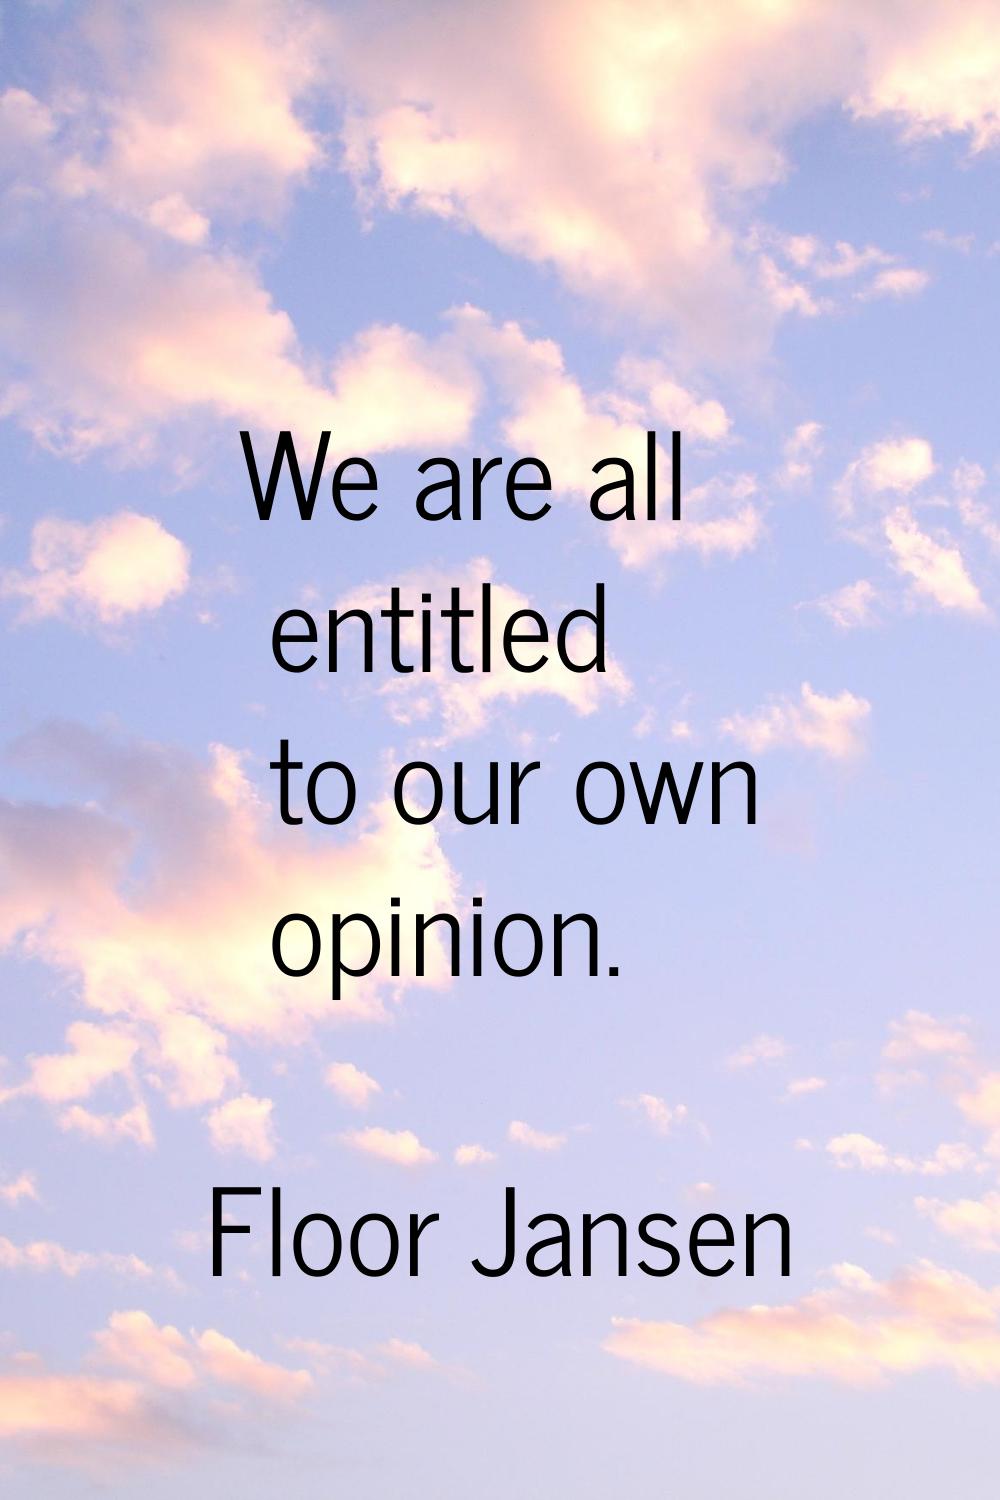 We are all entitled to our own opinion.